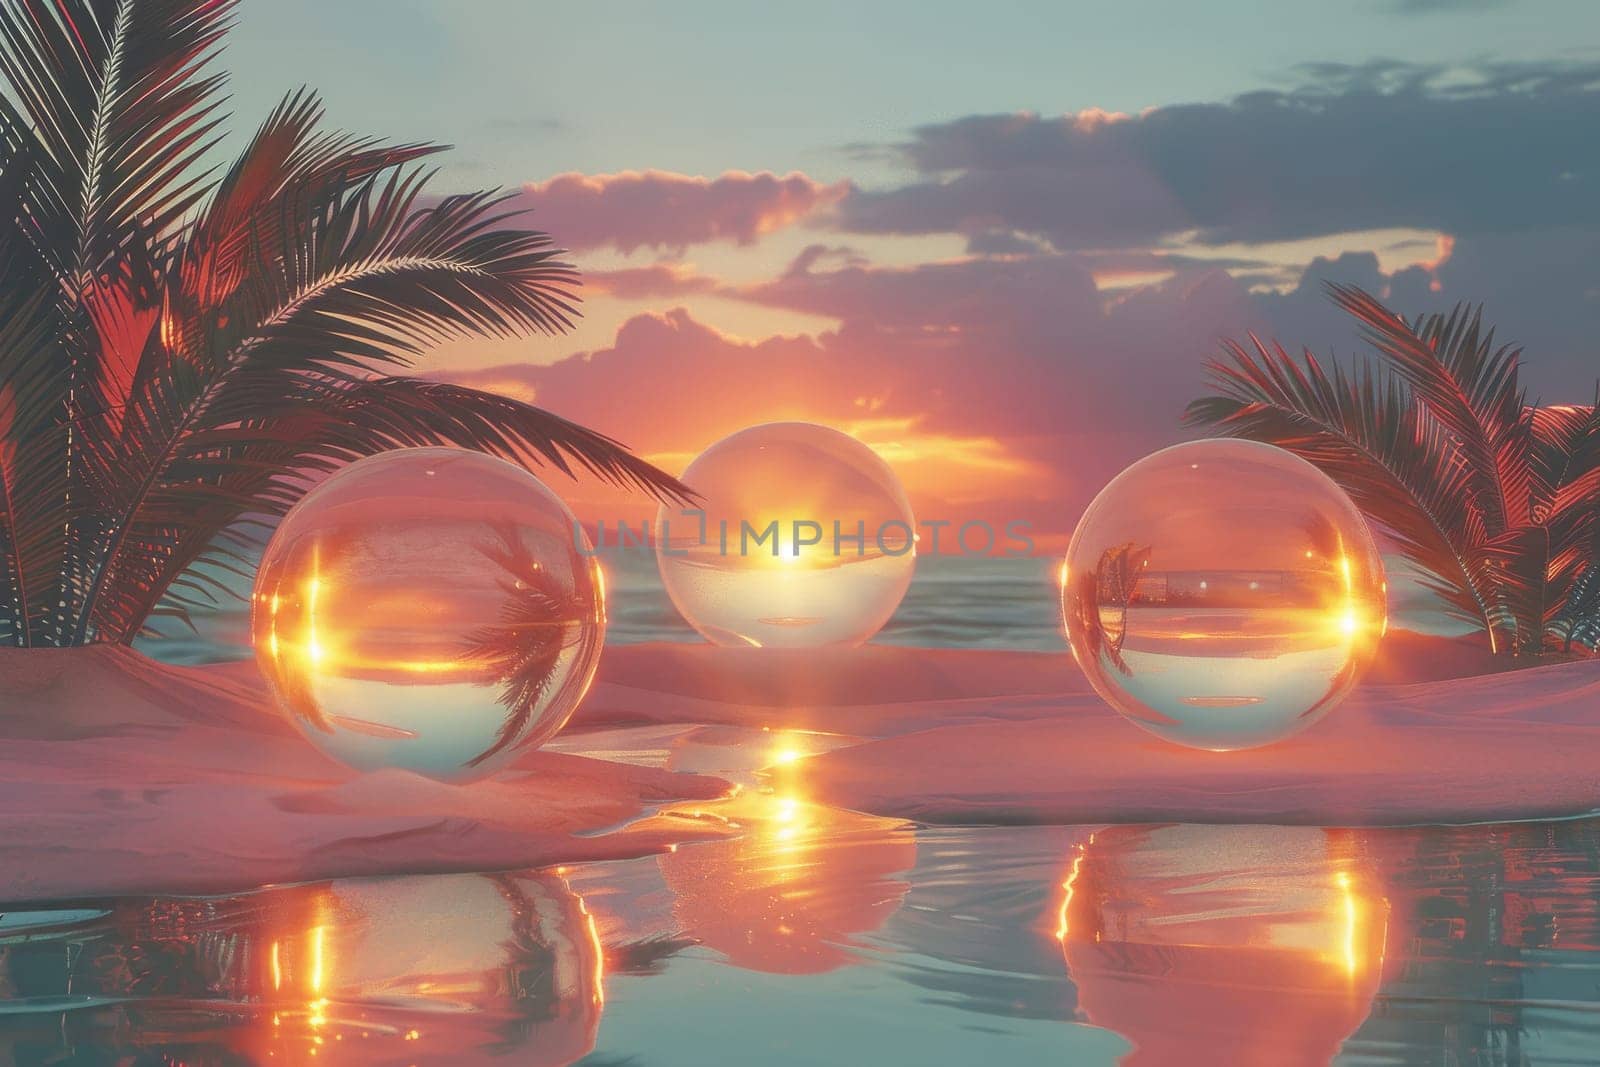 A beach scene with three large glass spheres reflecting the sun by itchaznong